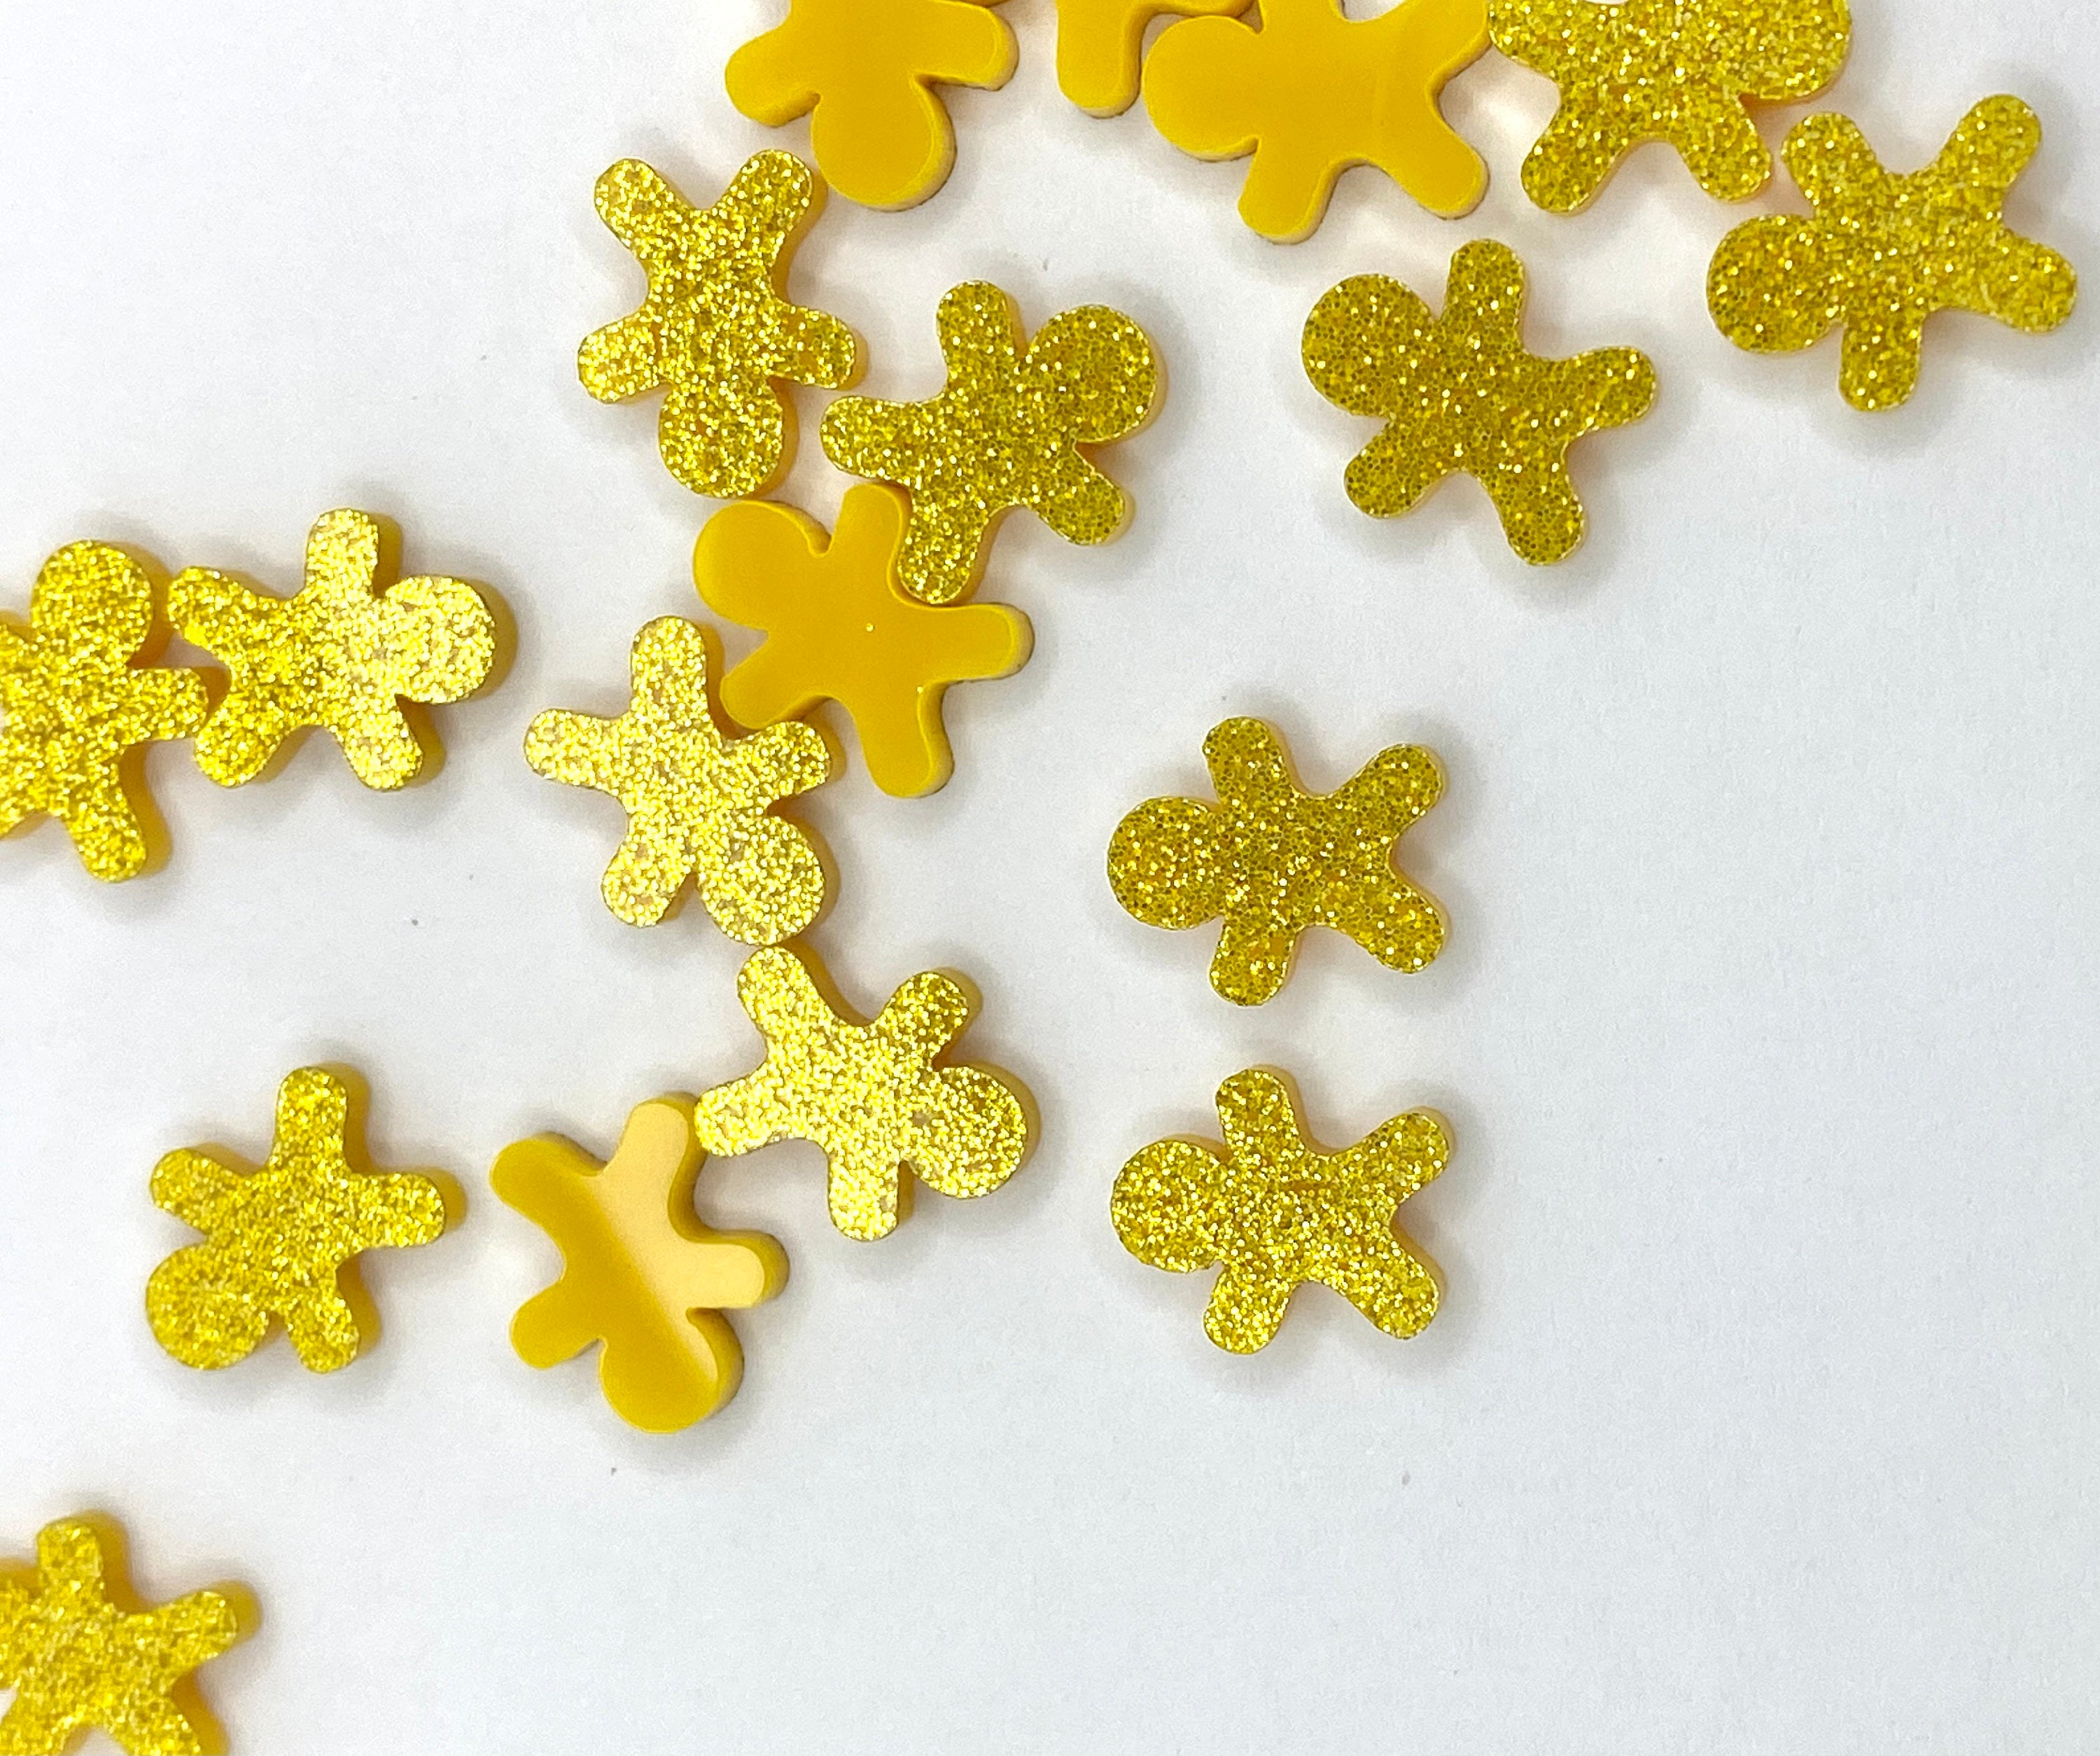 10 pcs,  Approx 12-14mm mixed Die Cut Glittered Christmas Acrylic Deer Gingerbread Man Tree